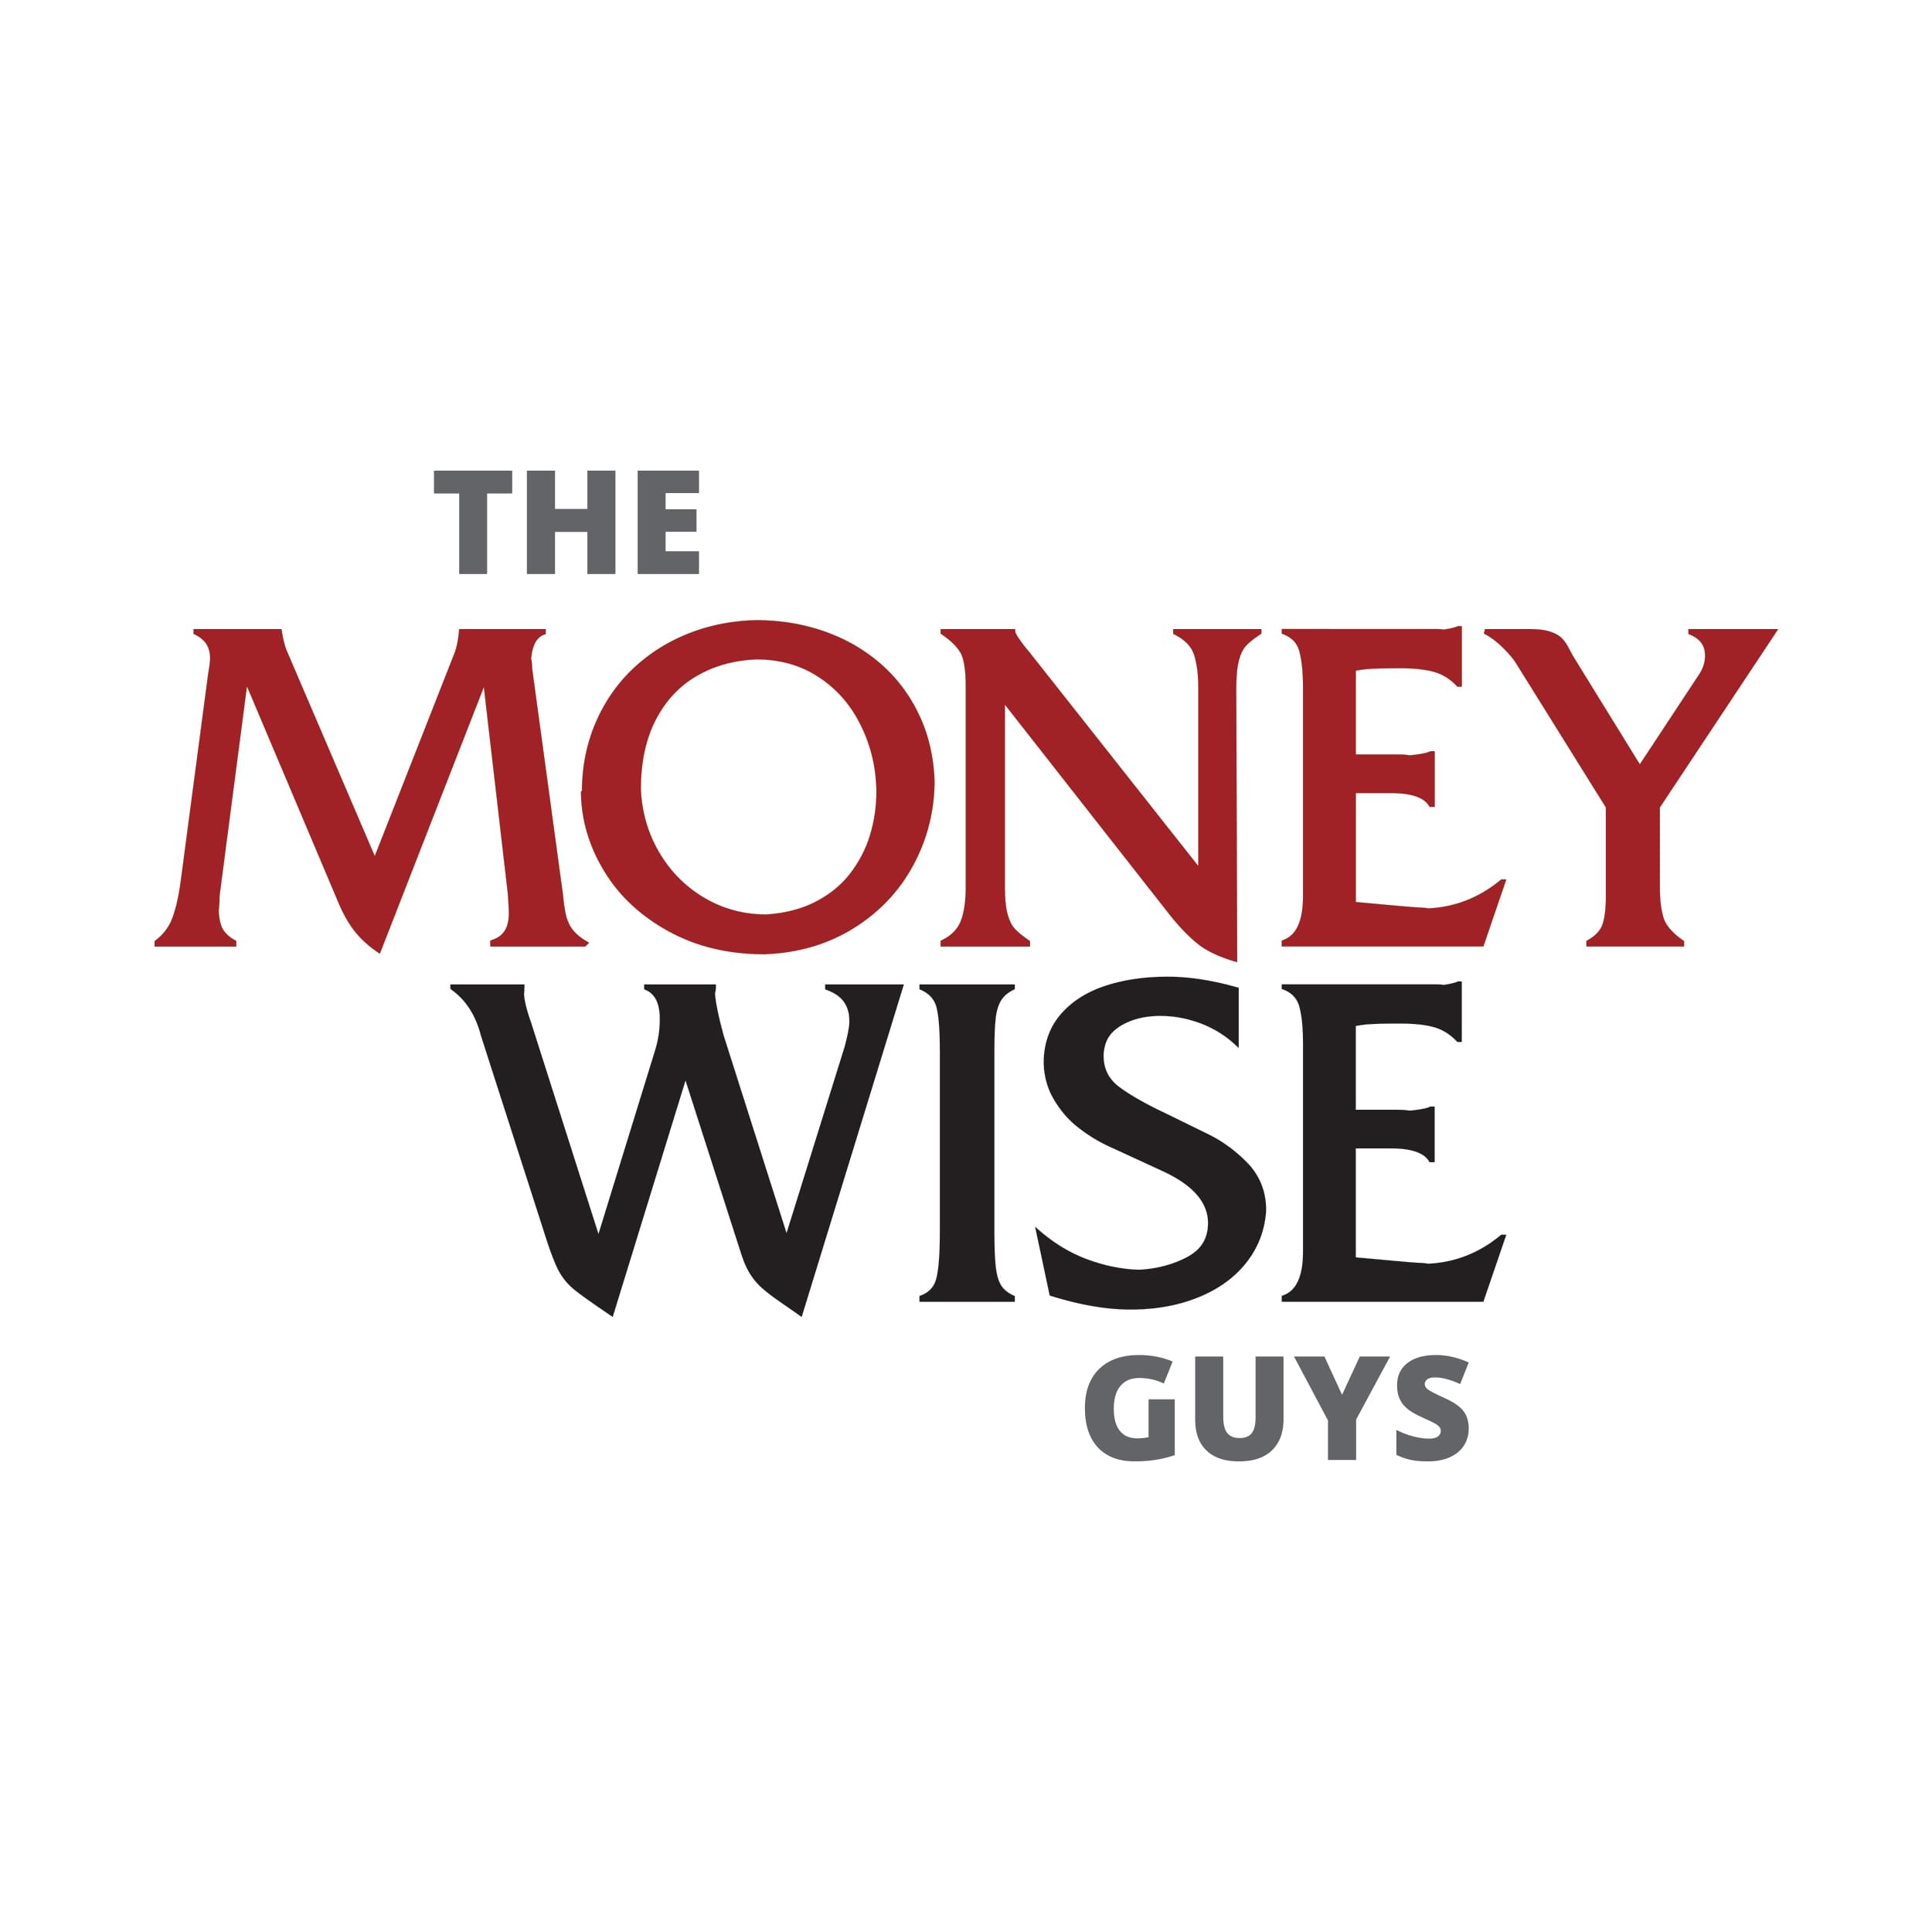 Sherod Waite of the Moneywise Guys explains the GameStop stock controversy